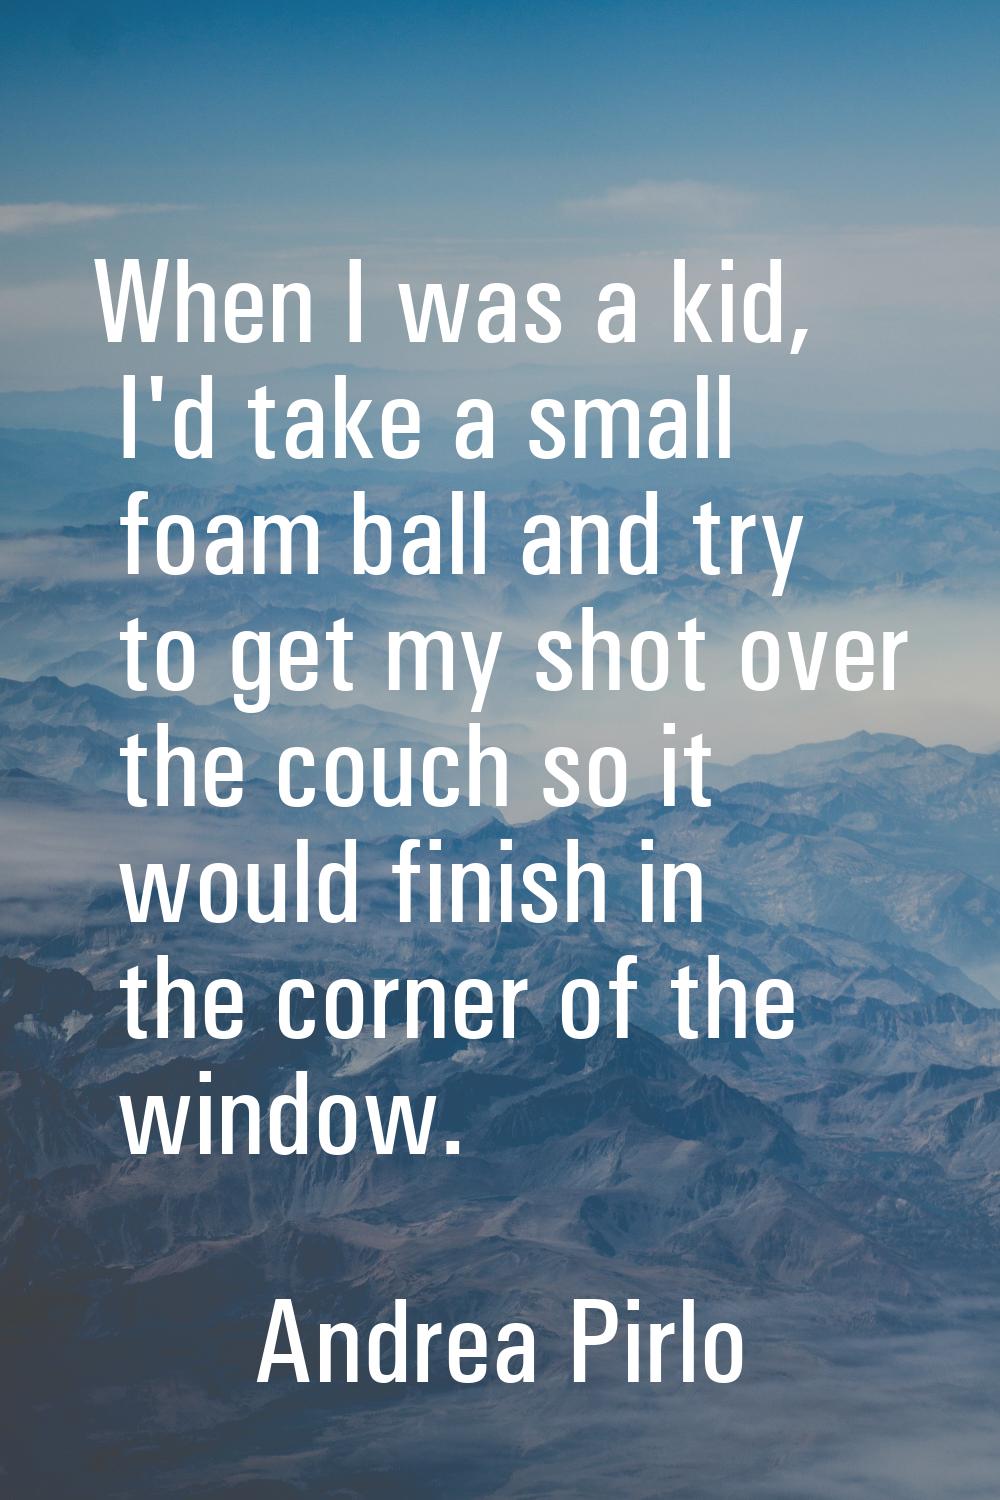 When I was a kid, I'd take a small foam ball and try to get my shot over the couch so it would fini